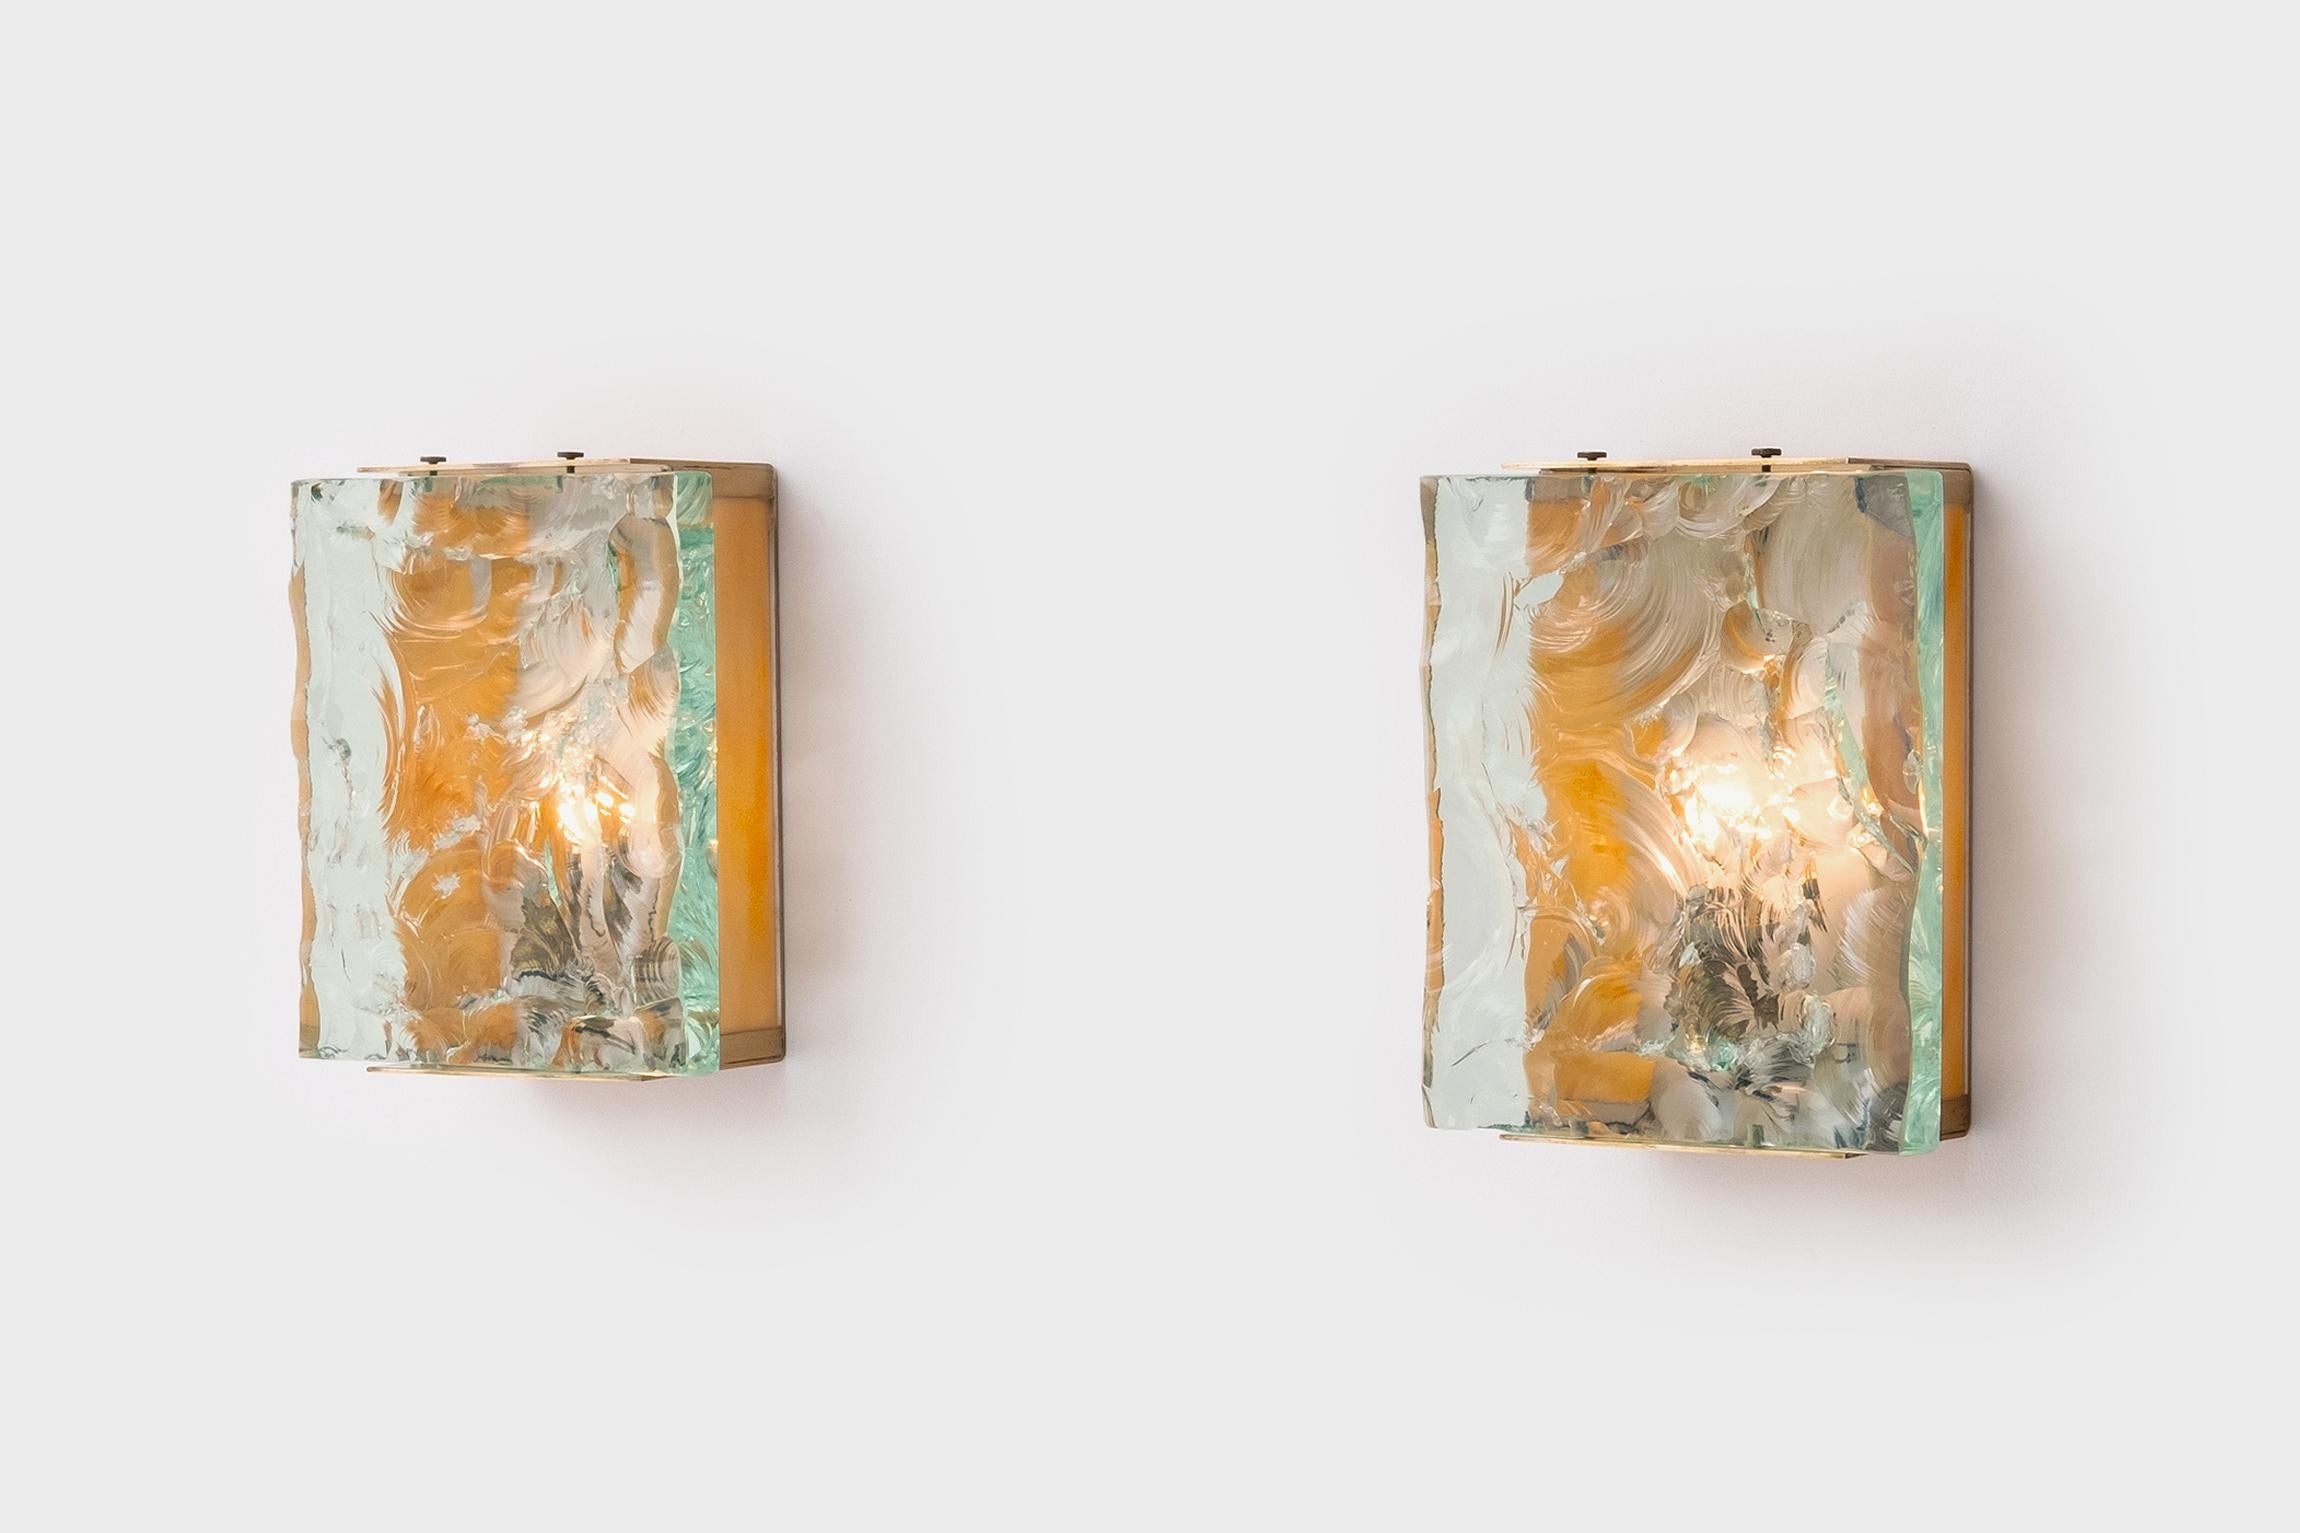 Exceptional wall sconces mod. 2311 by Max Ingrand for Fontana Arte, Italy 1964. Beautiful combination of the brute extraordinary thick hand chiseled glass with the refined brass framing and marbled yellow glass strokes. The lamps provide a nice and